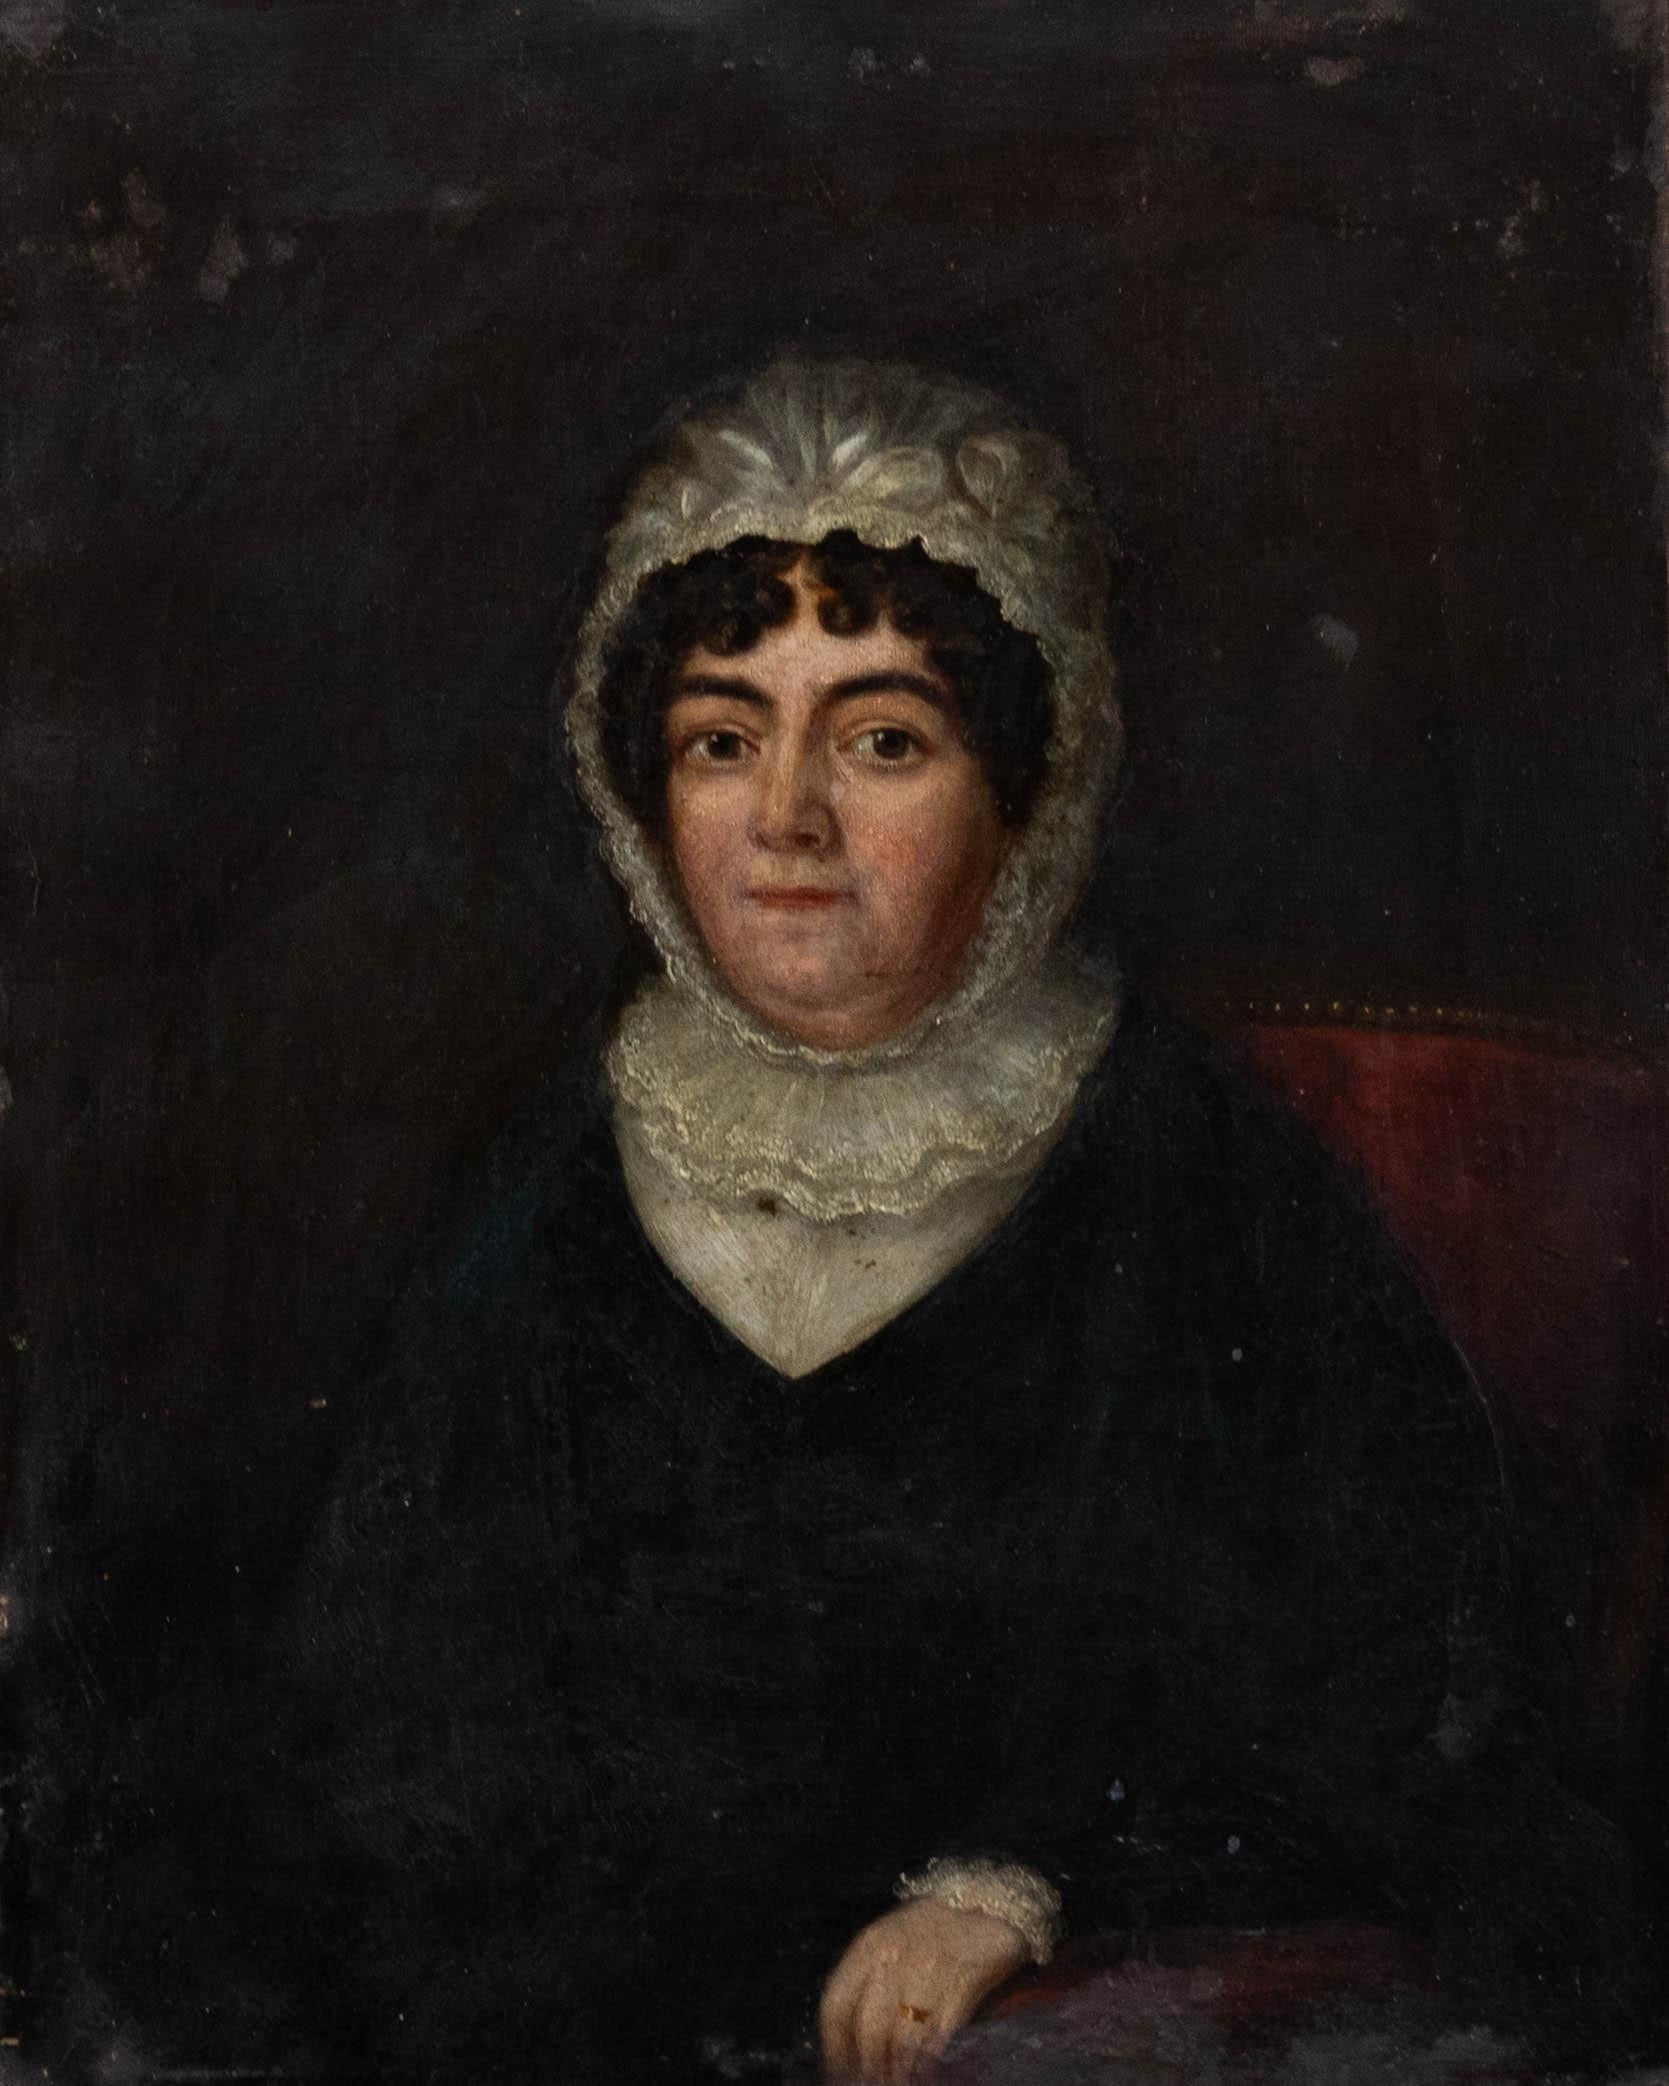 Unknown Portrait Painting - 19th Century Oil - Victorian Lady